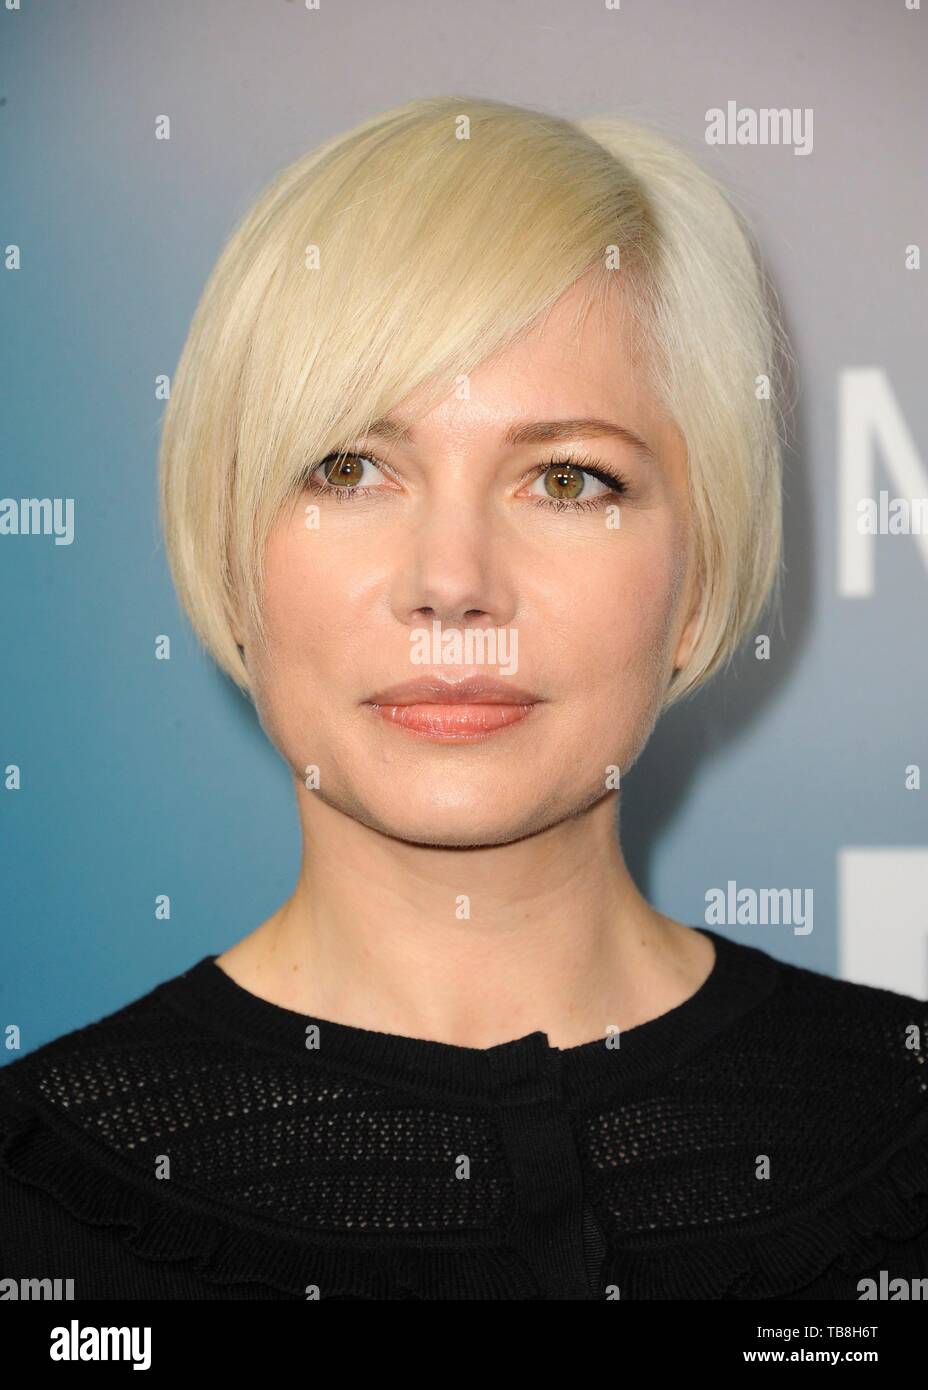 Los Angeles, CA, USA. 30th May, 2019. Michelle Williams at arrivals for FOSSE/VERDON FYC Event Red Carpet, Samuel Goldwyn Theater at AMPAS, Los Angeles, CA May 30, 2019. Credit: Elizabeth Goodenough/Everett Collection/Alamy Live News Stock Photo